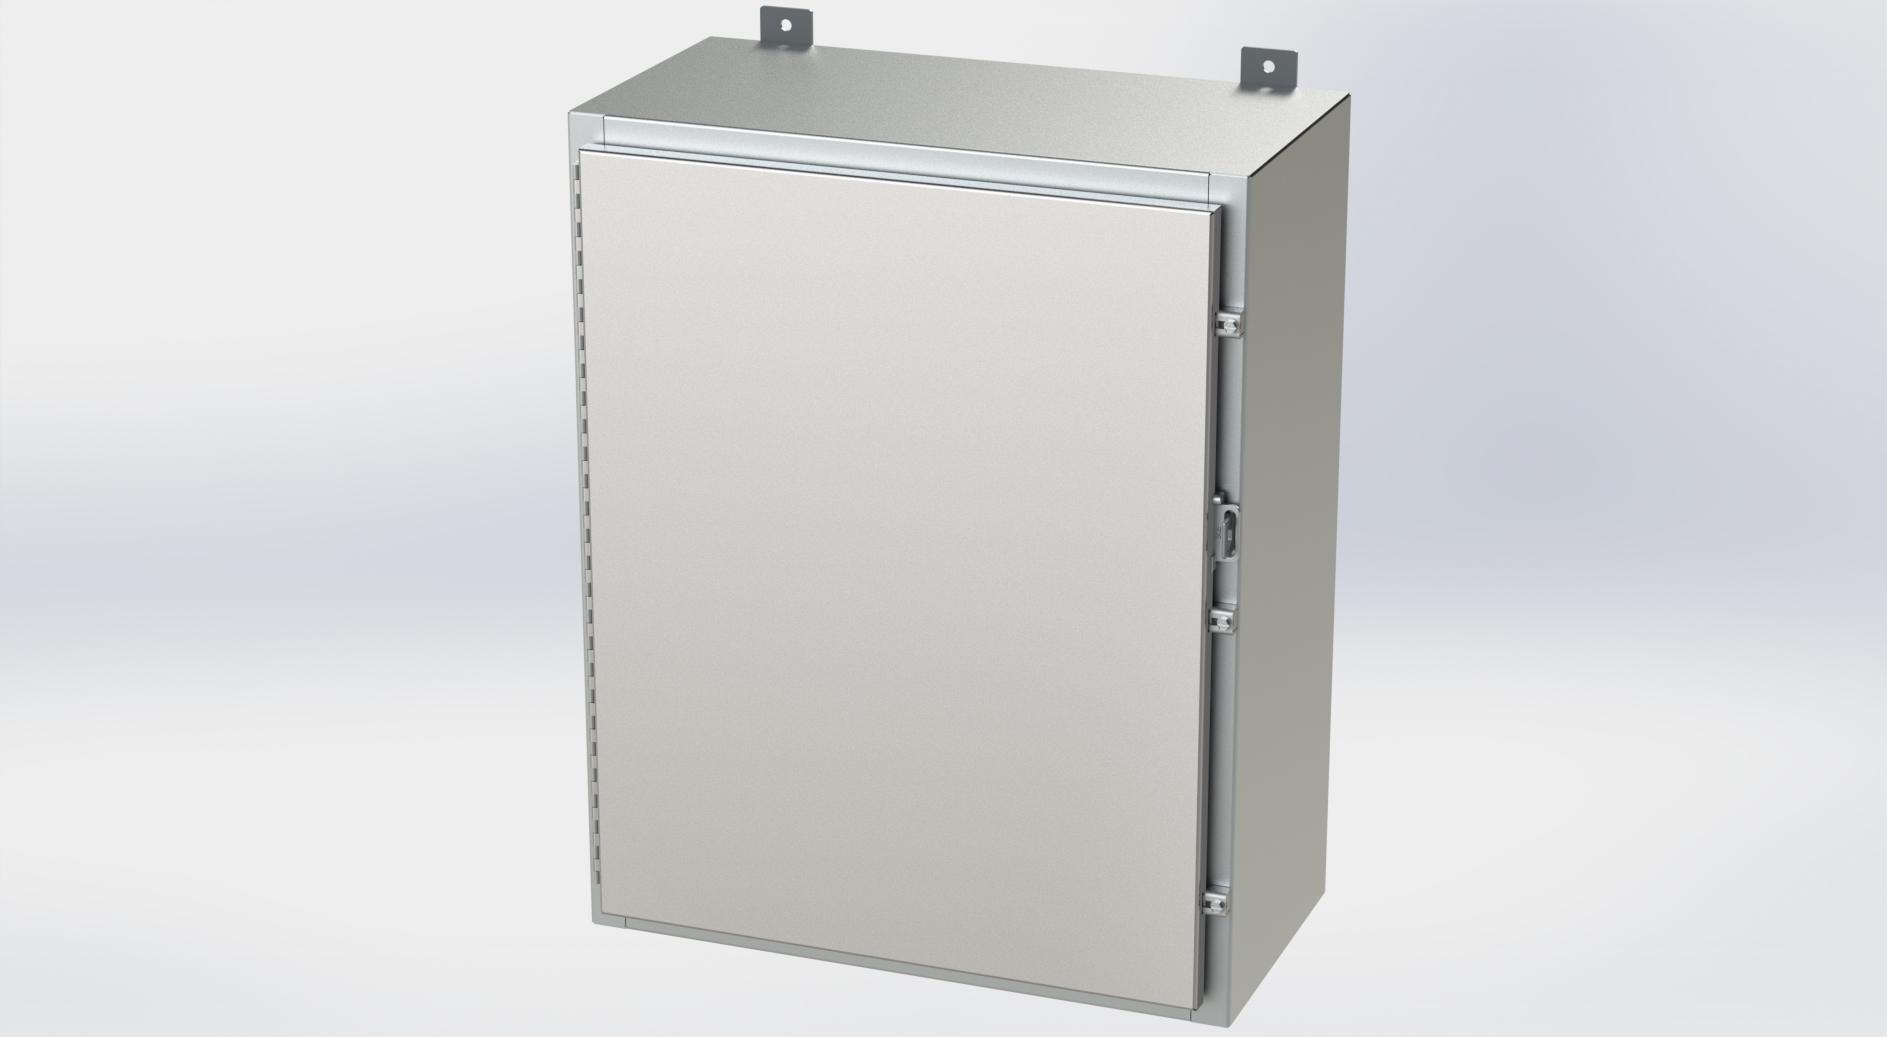 Saginaw Control SCE-30H2412SSLP Nema 4X LP Enclosure, Height:30.00", Width:24.00", Depth:12.00", #4 brushed finish on all exterior surfaces. Optional sub-panels are powder coated white.